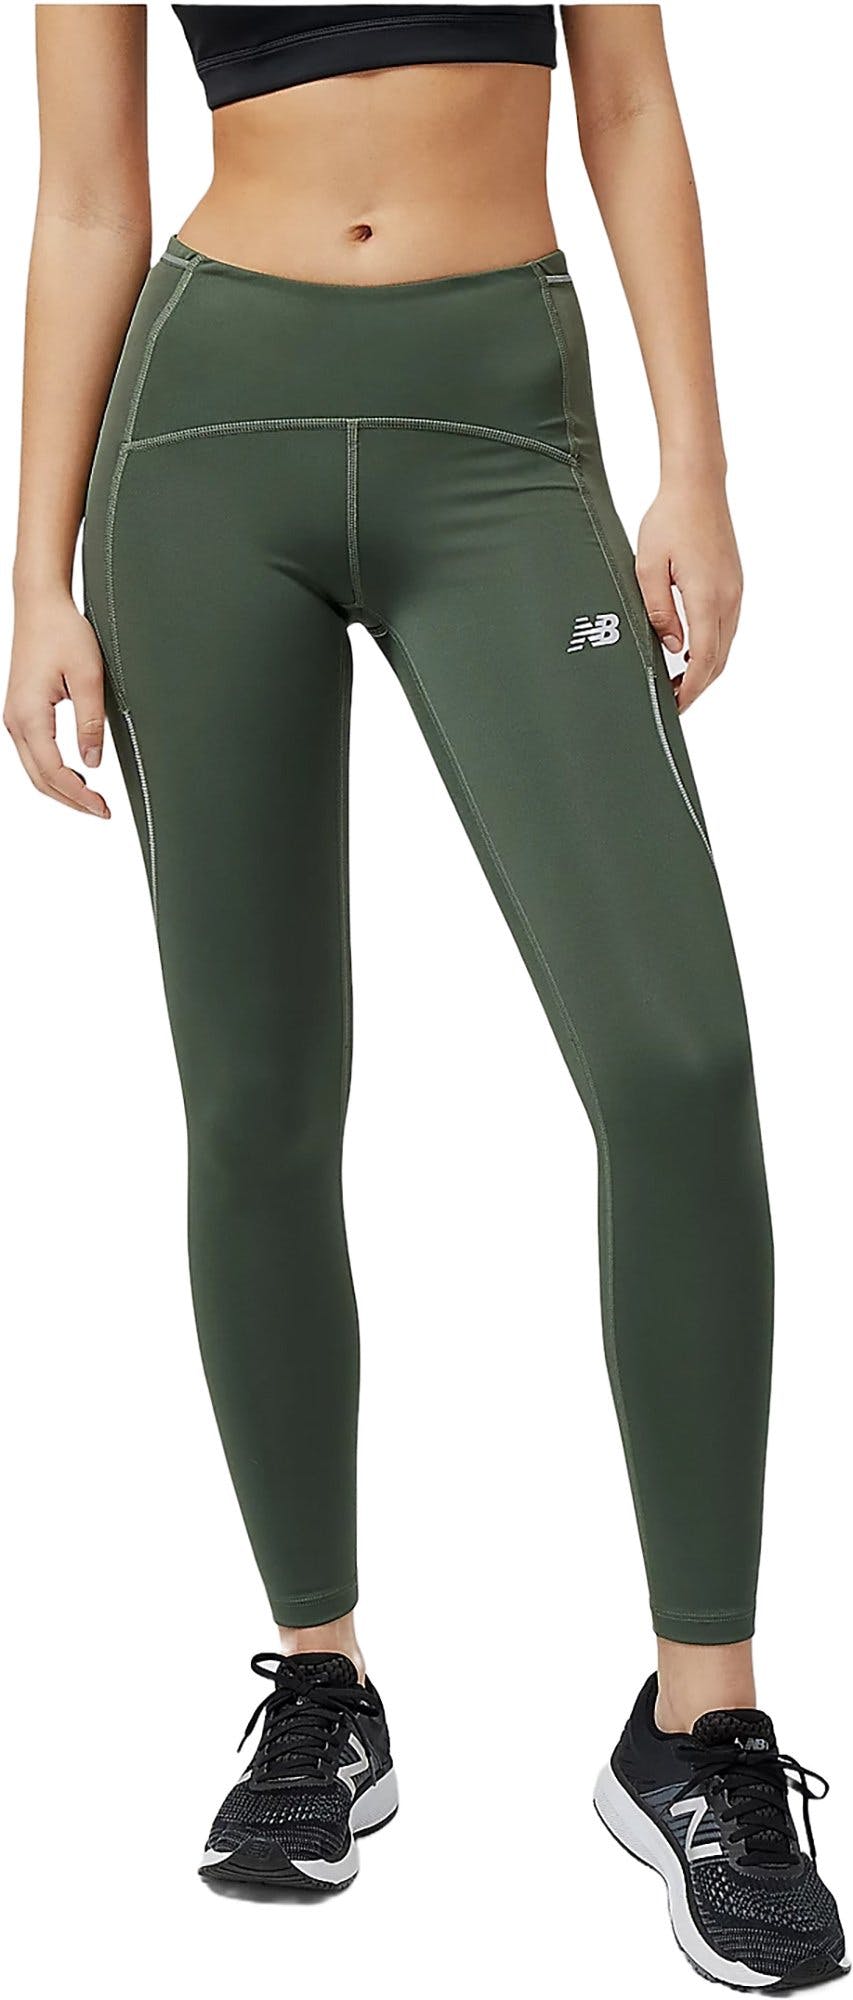 Product image for Impact Run Tight - Women's